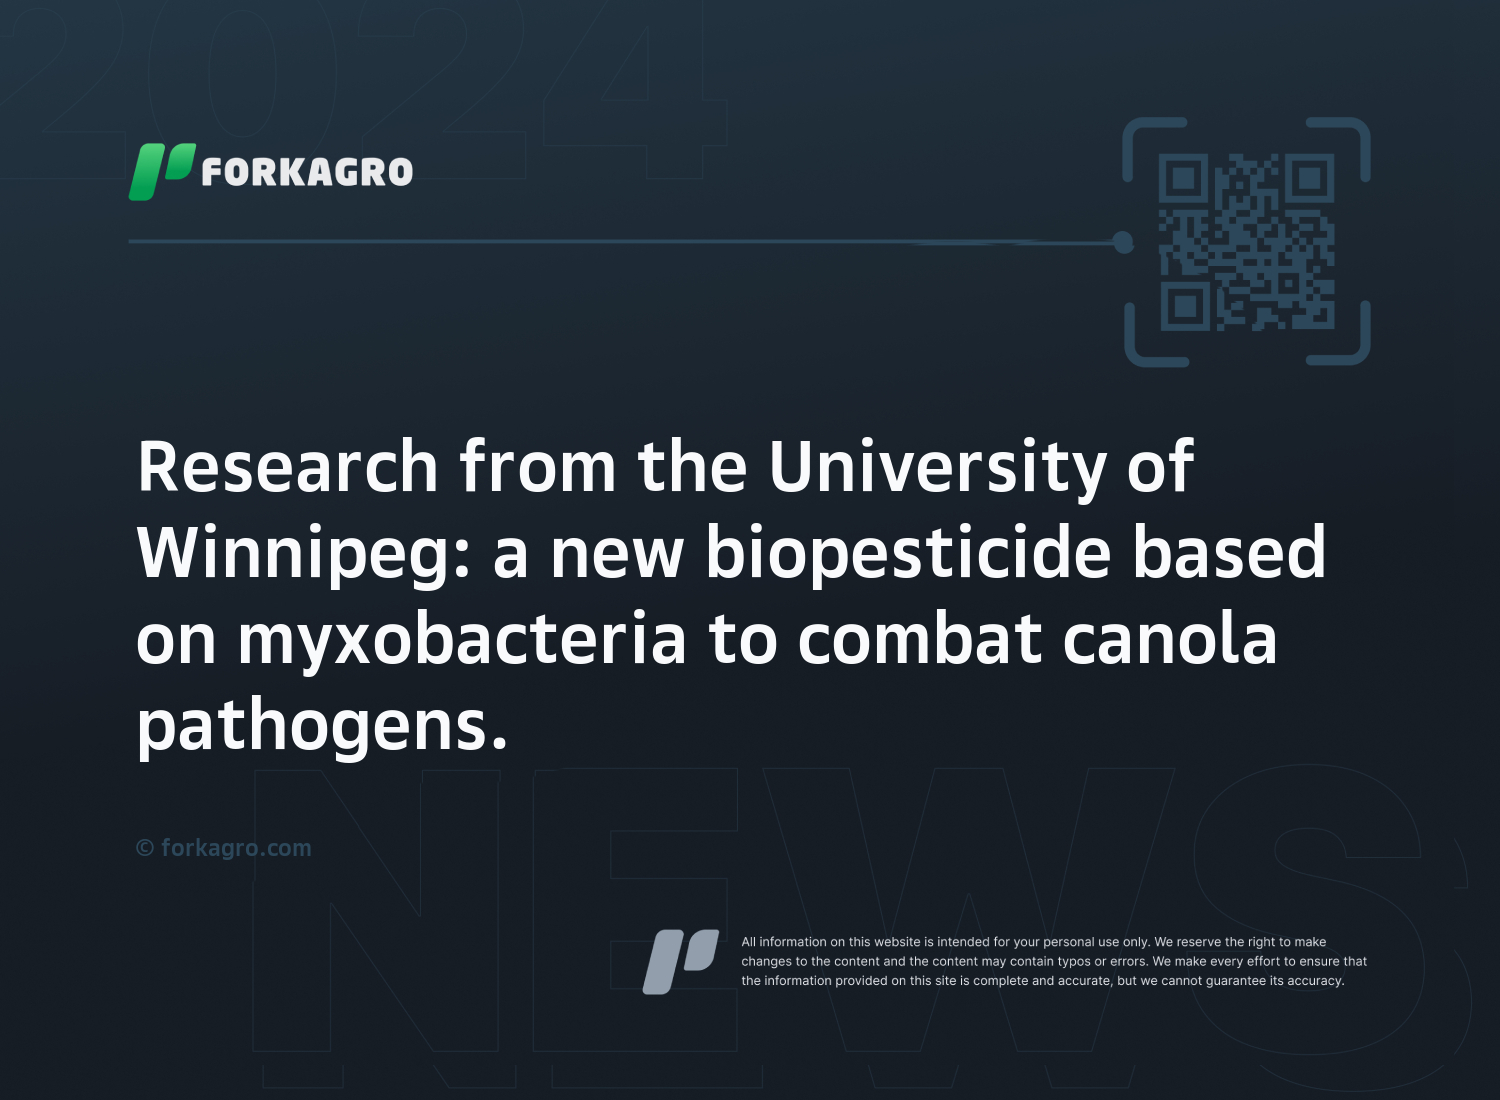 Research from the University of Winnipeg: a new biopesticide based on myxobacteria to combat canola pathogens.